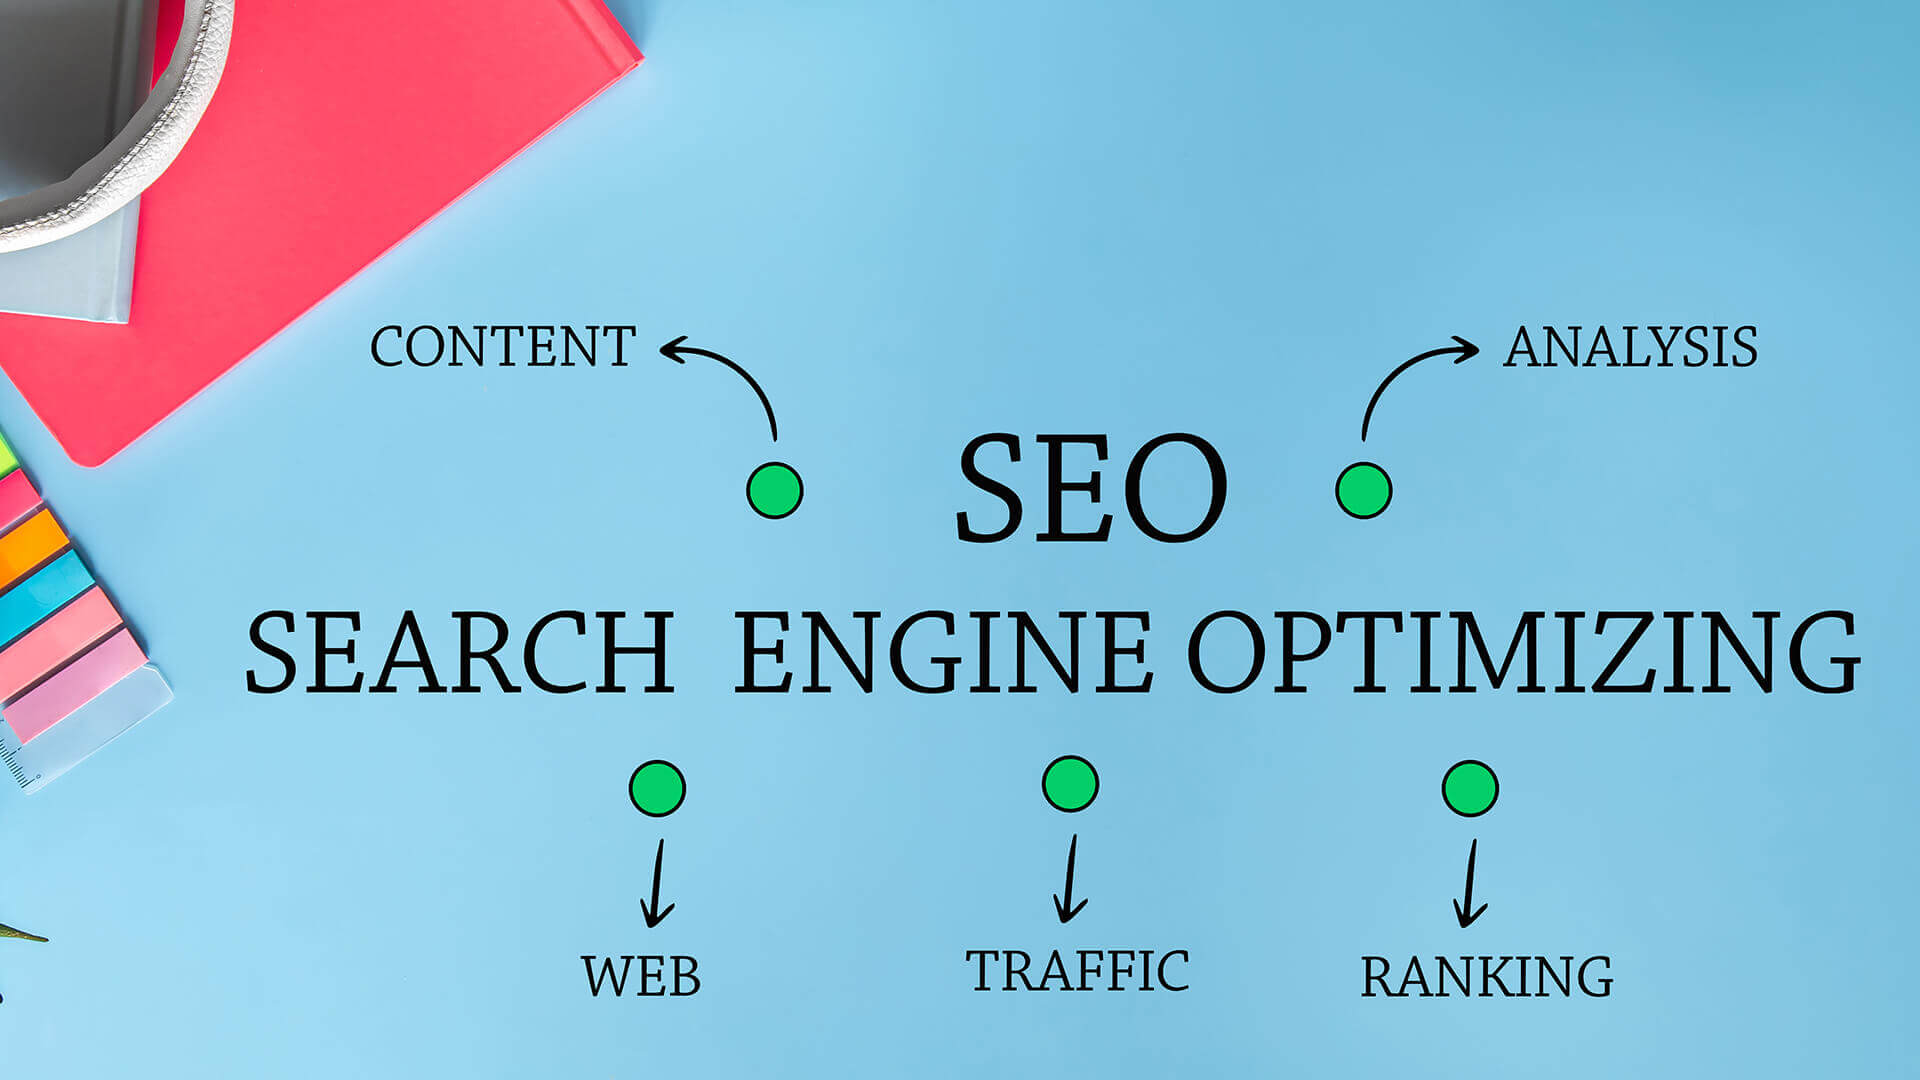 The importance of SEO in digital marketing